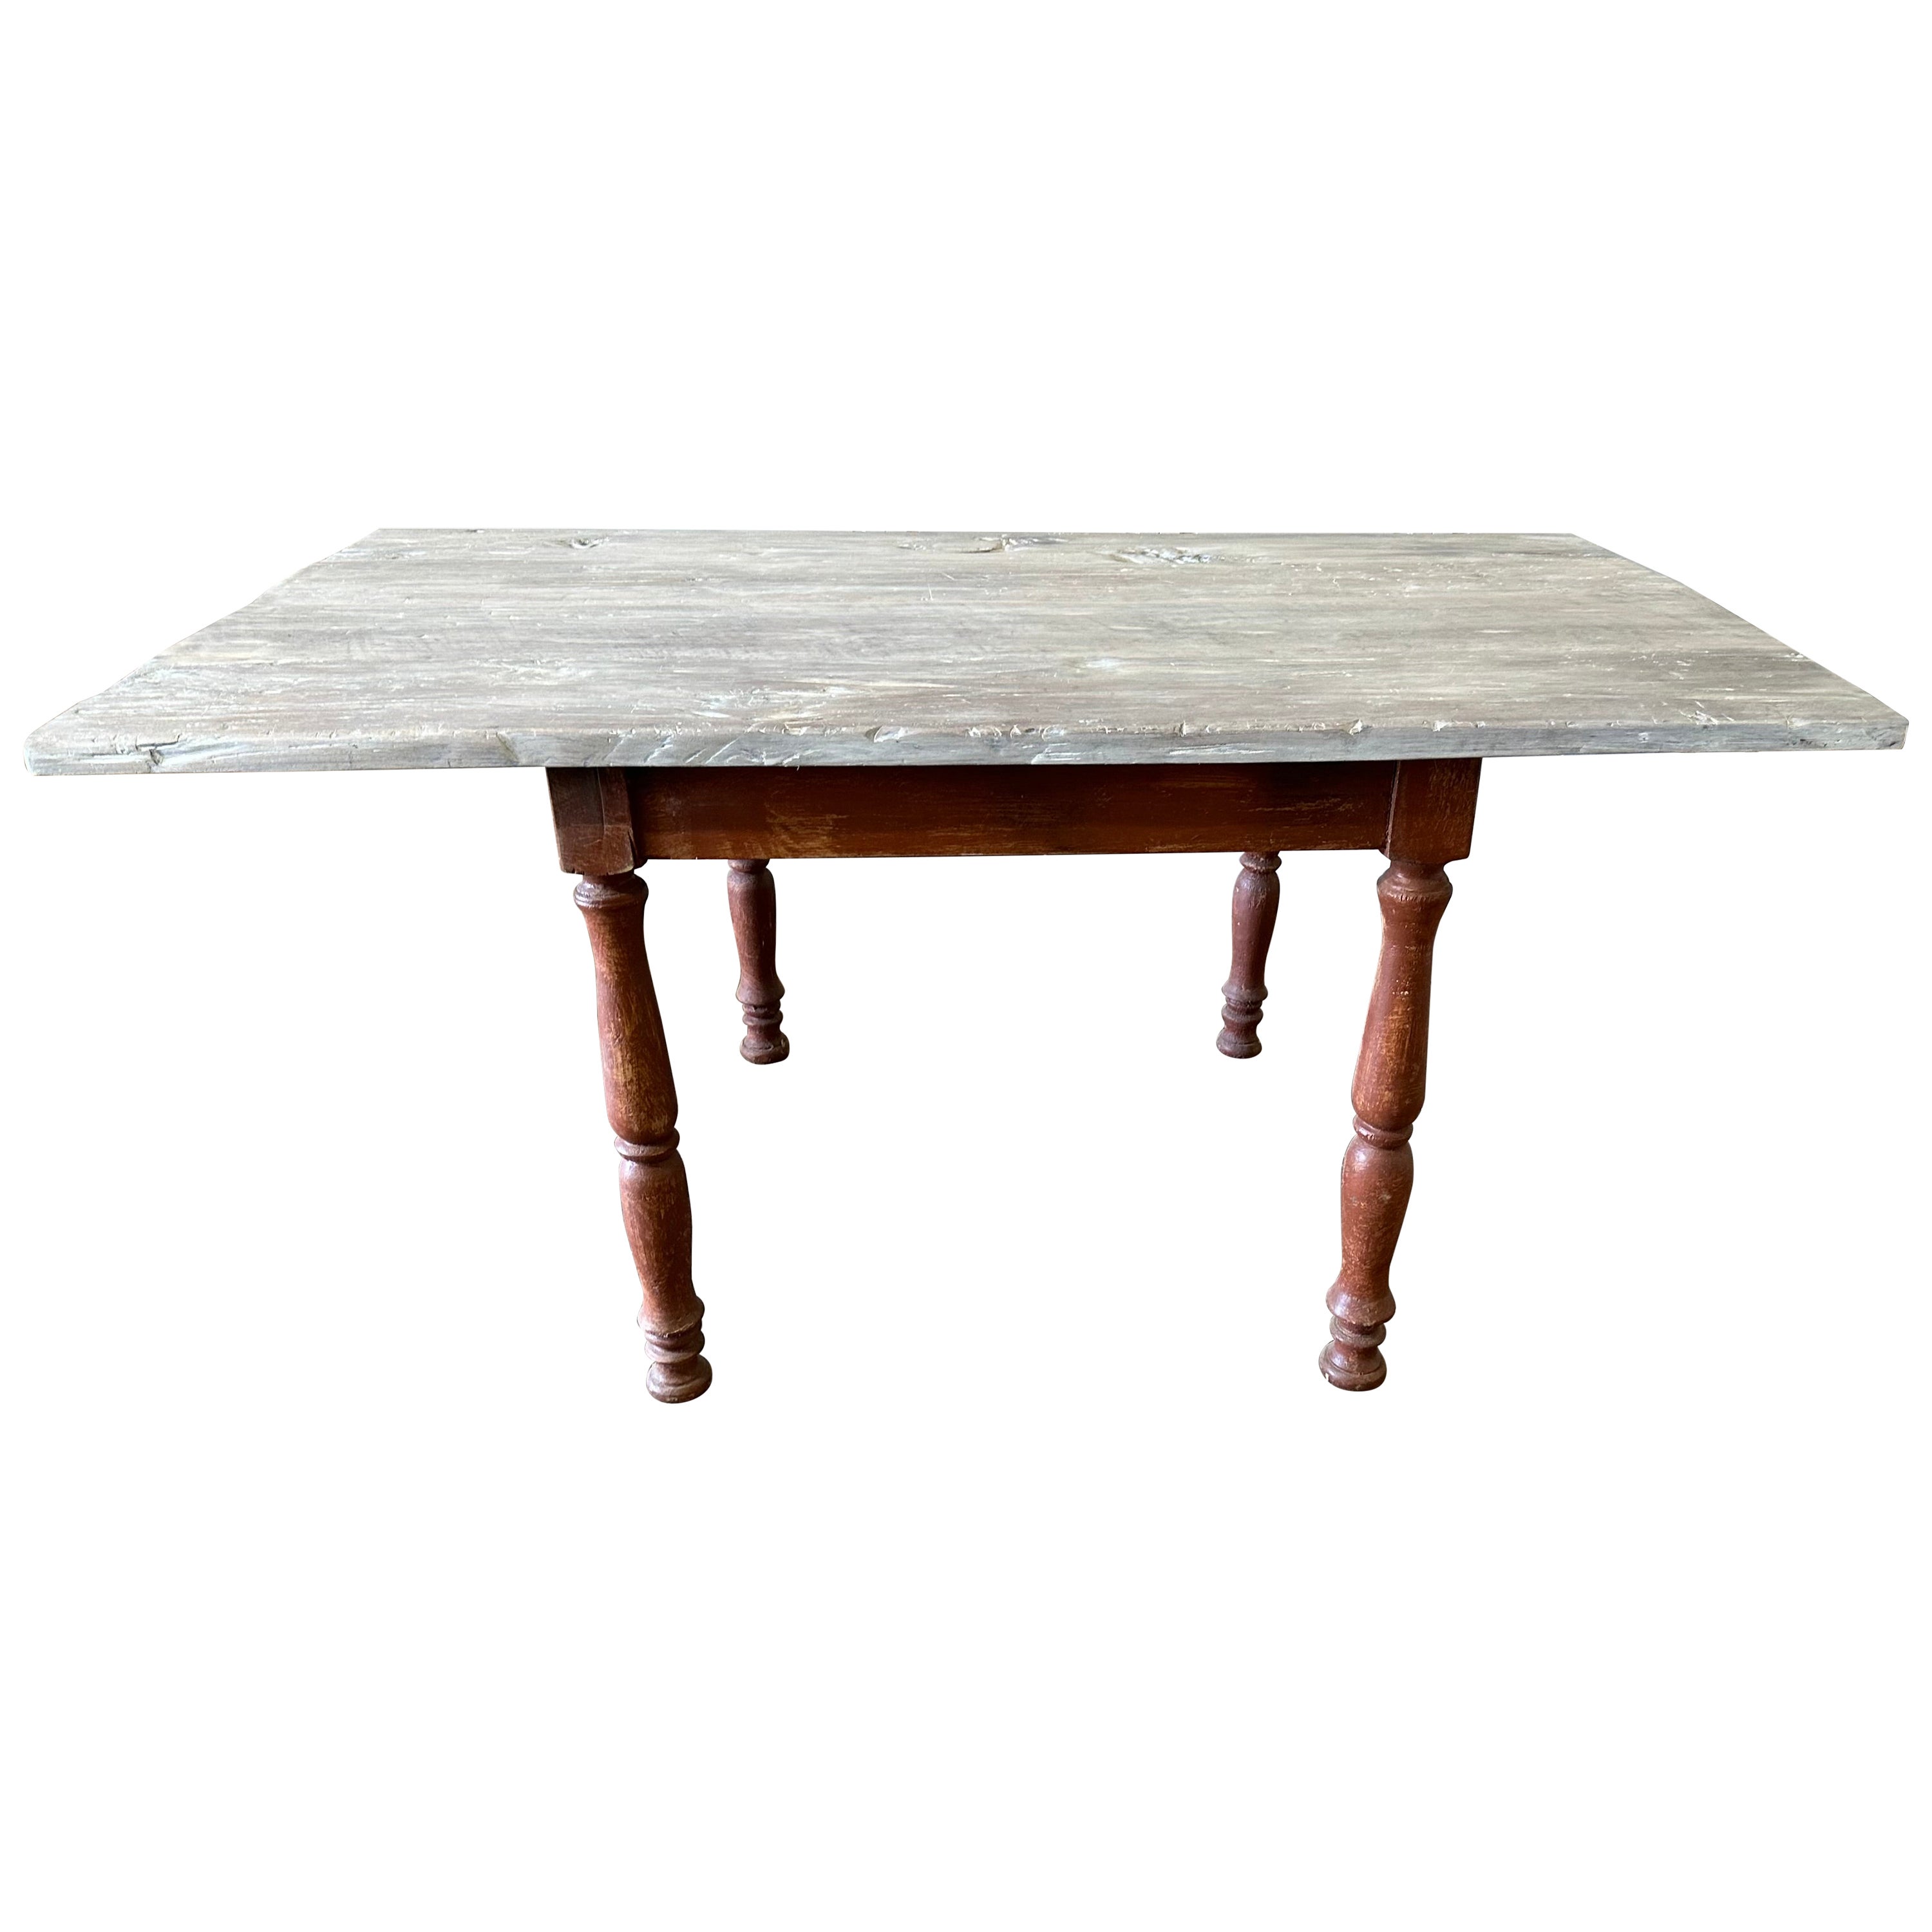 Vintage Swedish Style White Washed Table Painted Base Dining Table For Sale